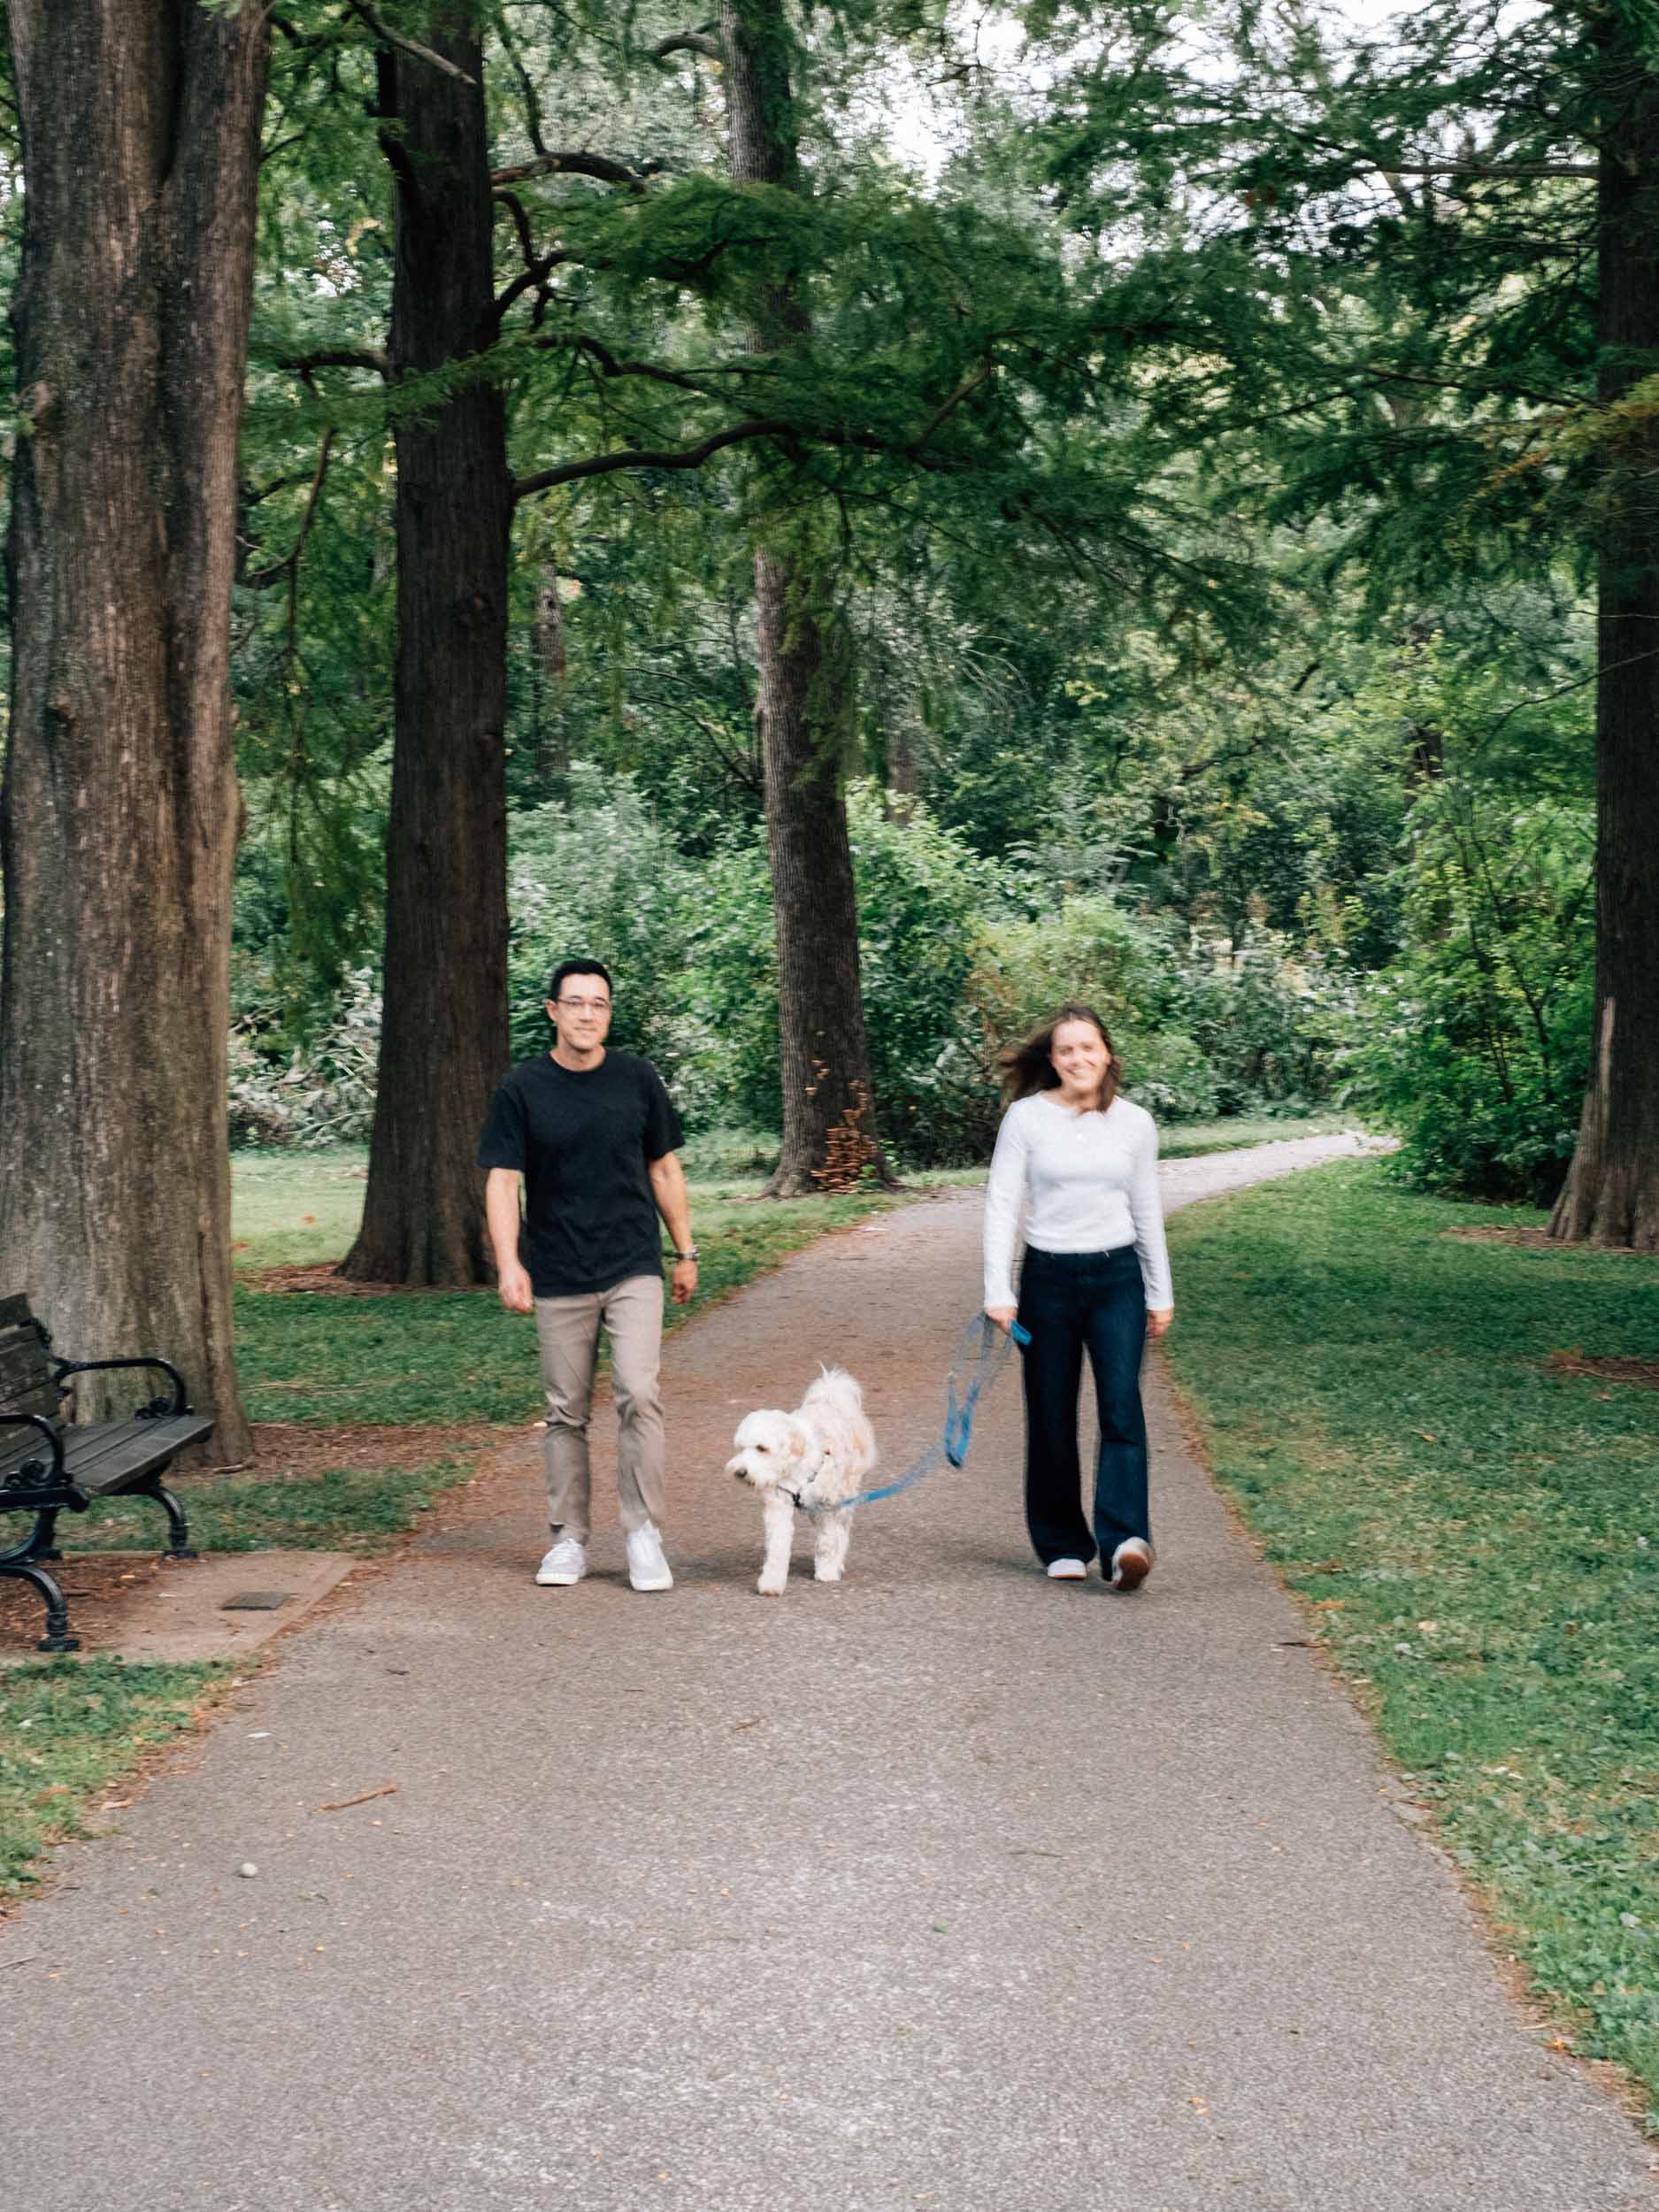 A couple and their dog walking down a path with tall trees, with a nostalgic film photography style.